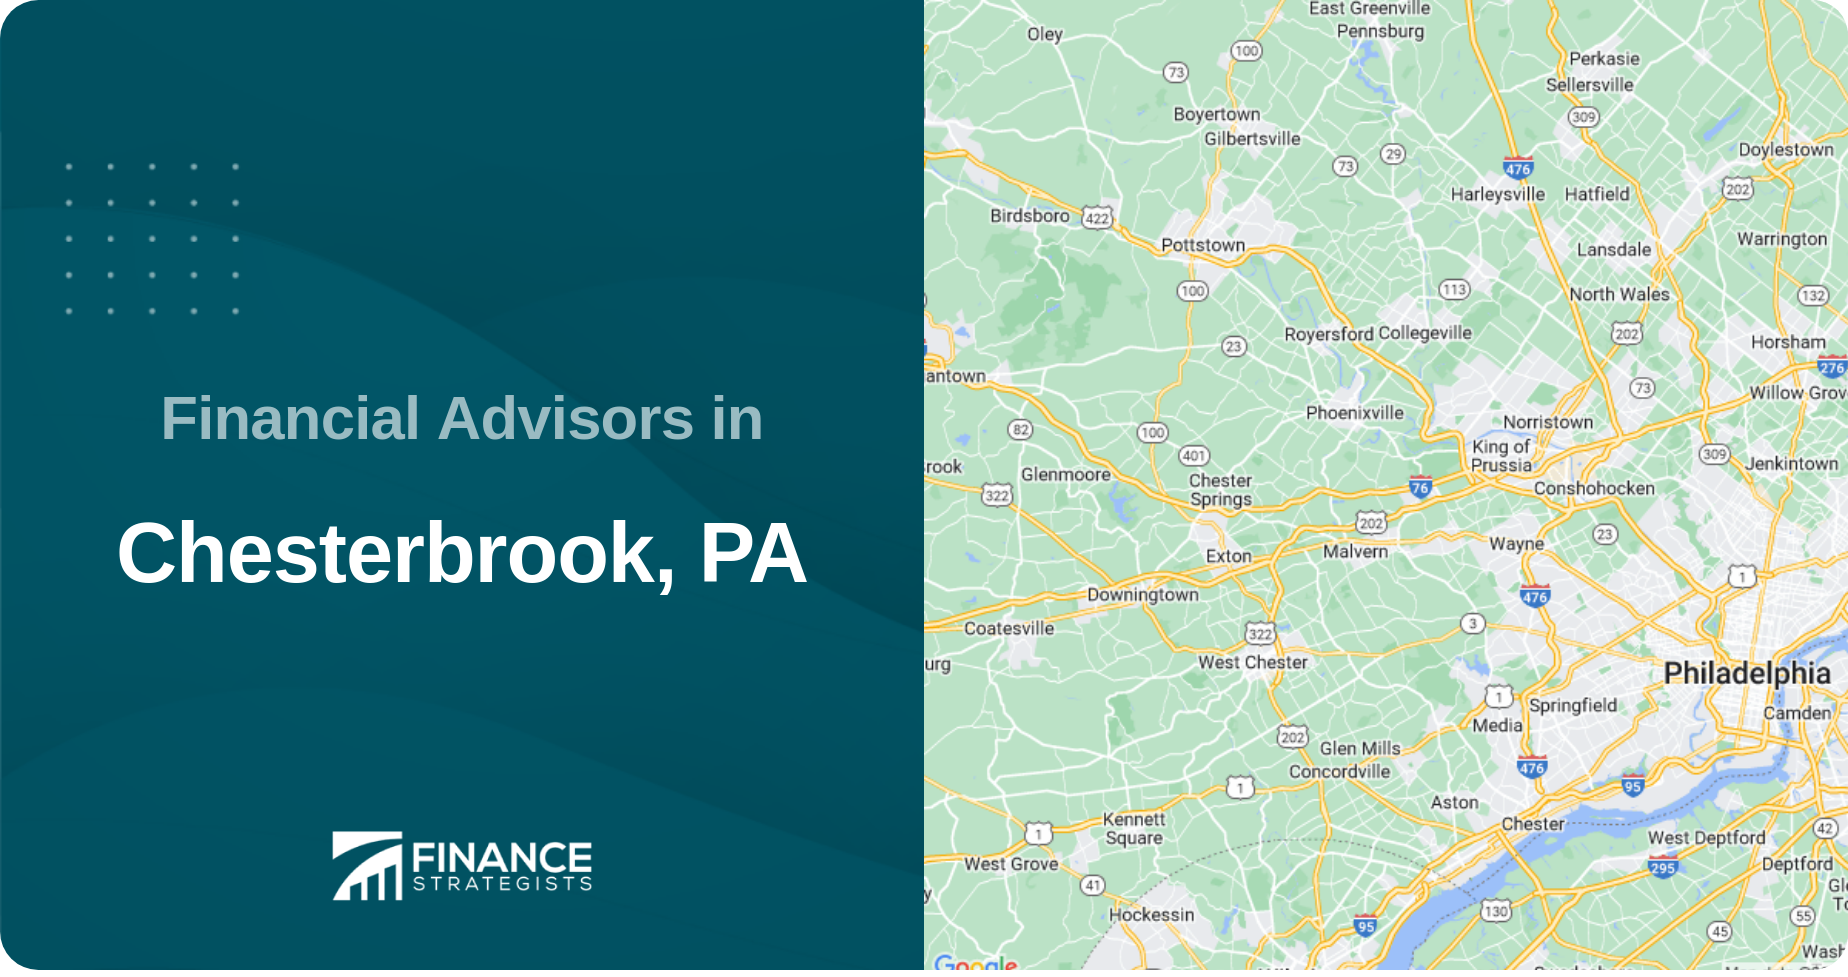 Financial Advisors in Chesterbrook, PA